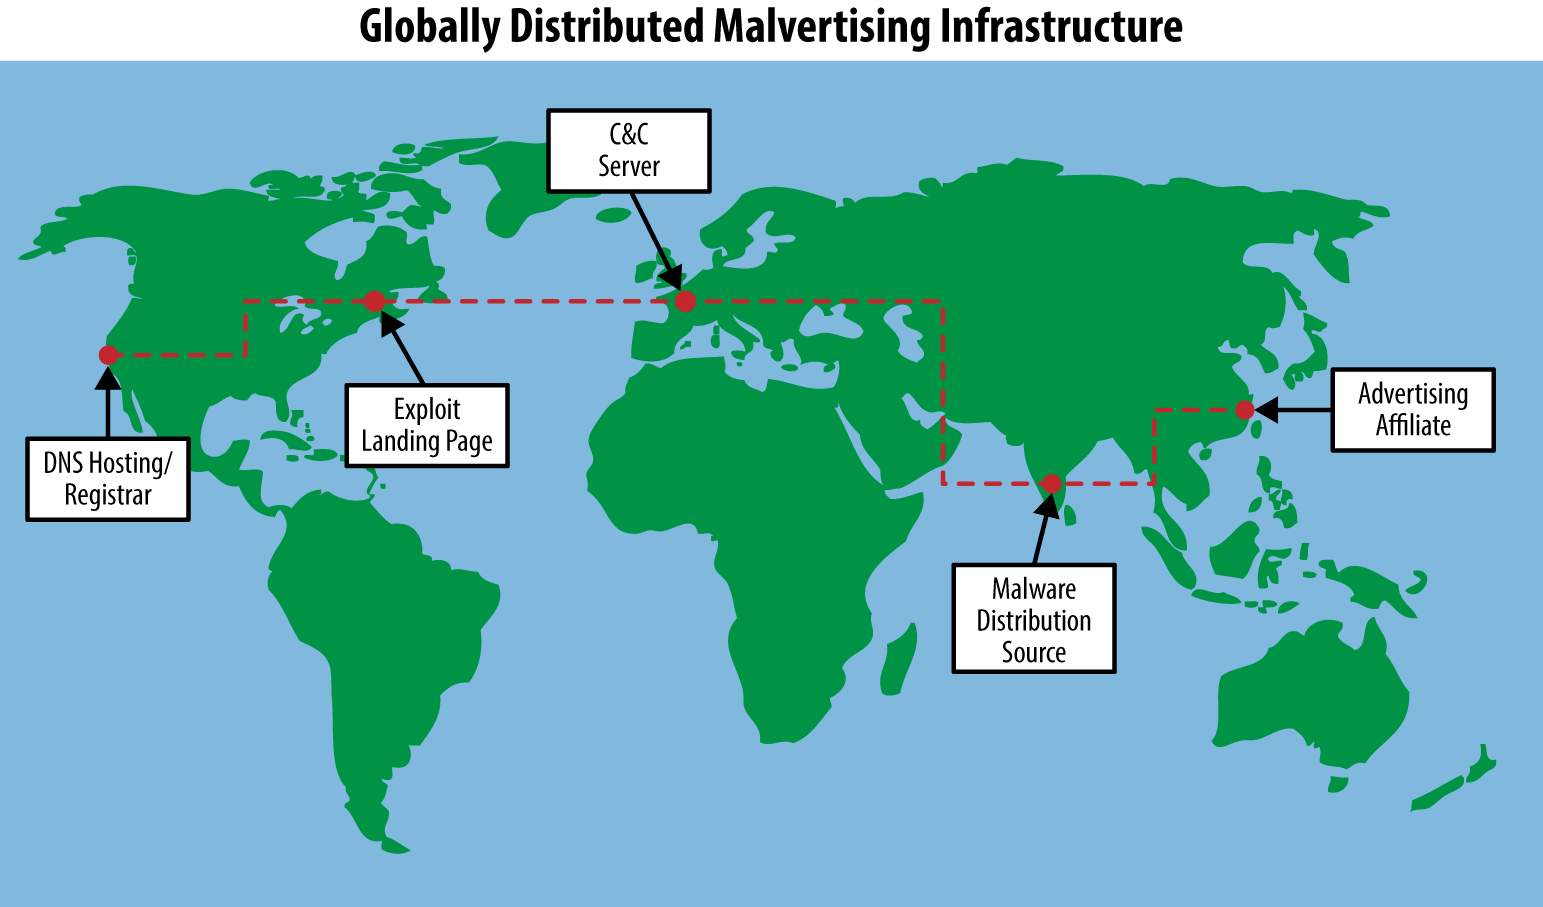 Typically, malware campaigns make use of globally spread infrastructure for successful exploitation and bot delivery.  Often infrastructure is used based on availability and opportunity in response to the defender's actions, forcing the attackers to constantly shift techniques. By splitting up the infrastructure into components, attackers are able to constantly work on standing up replacement infrastructure as needed.